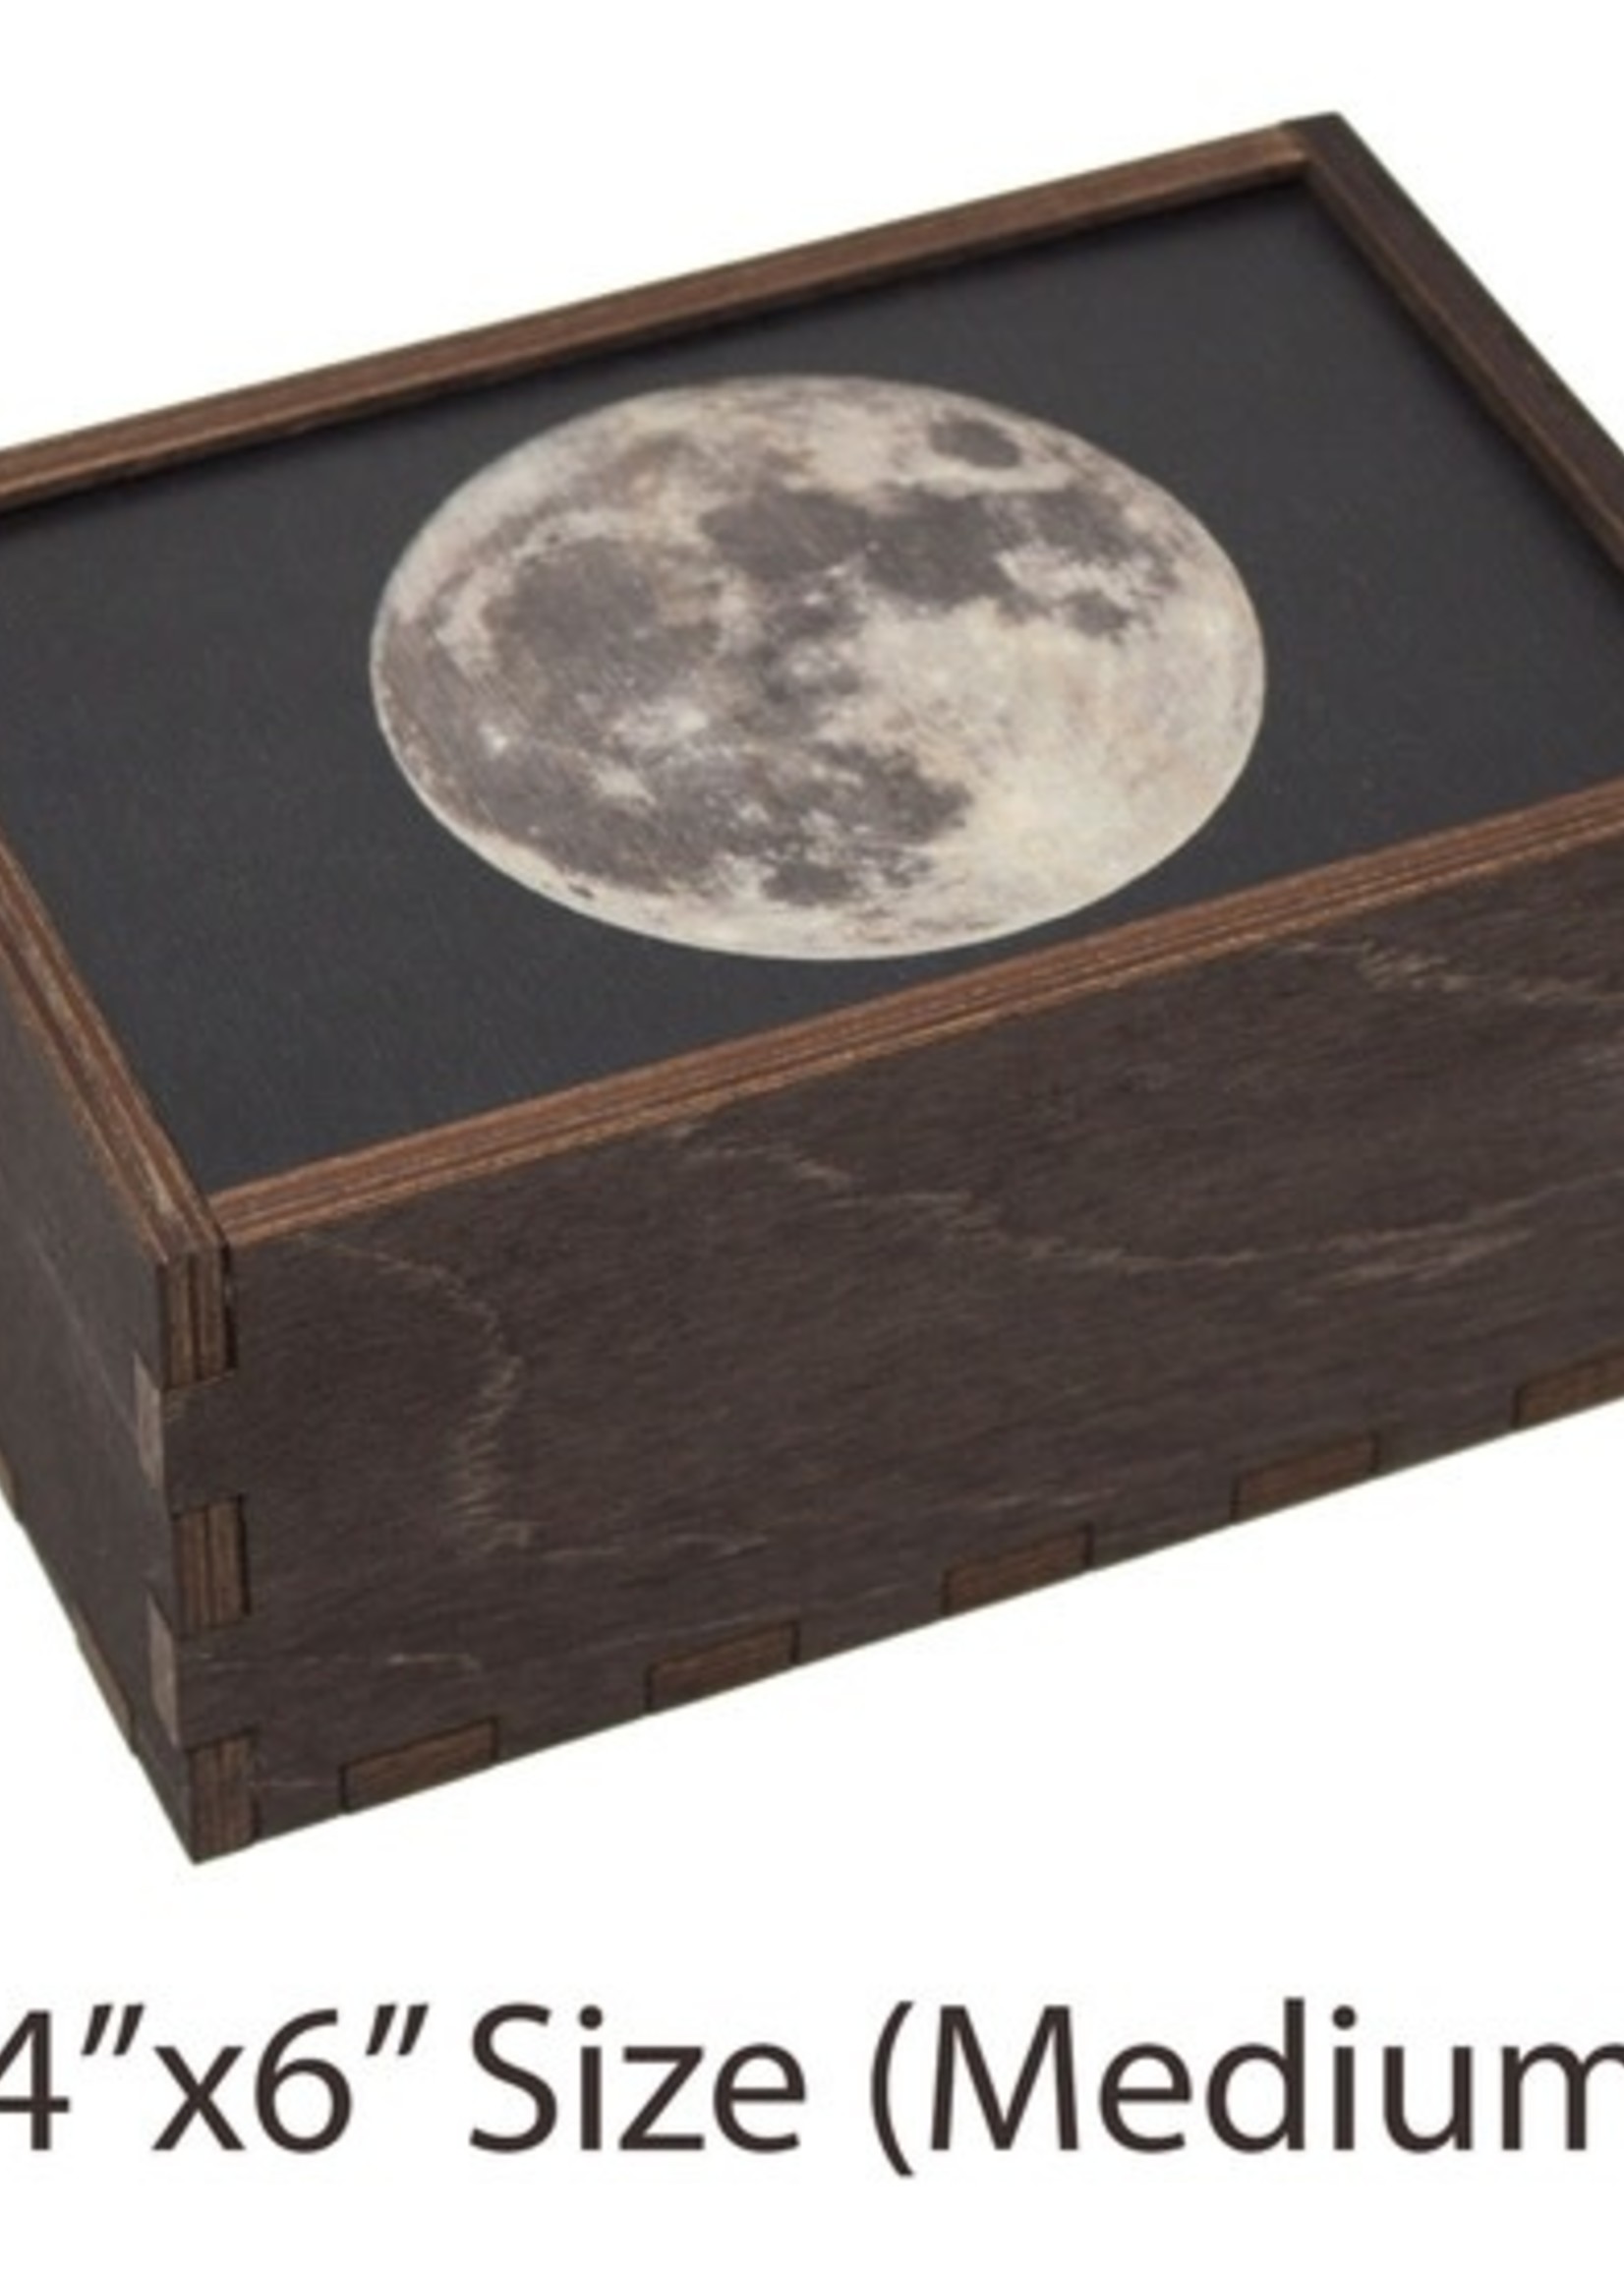 Most Amazing Boxes: Full Moon Full Color 4x6